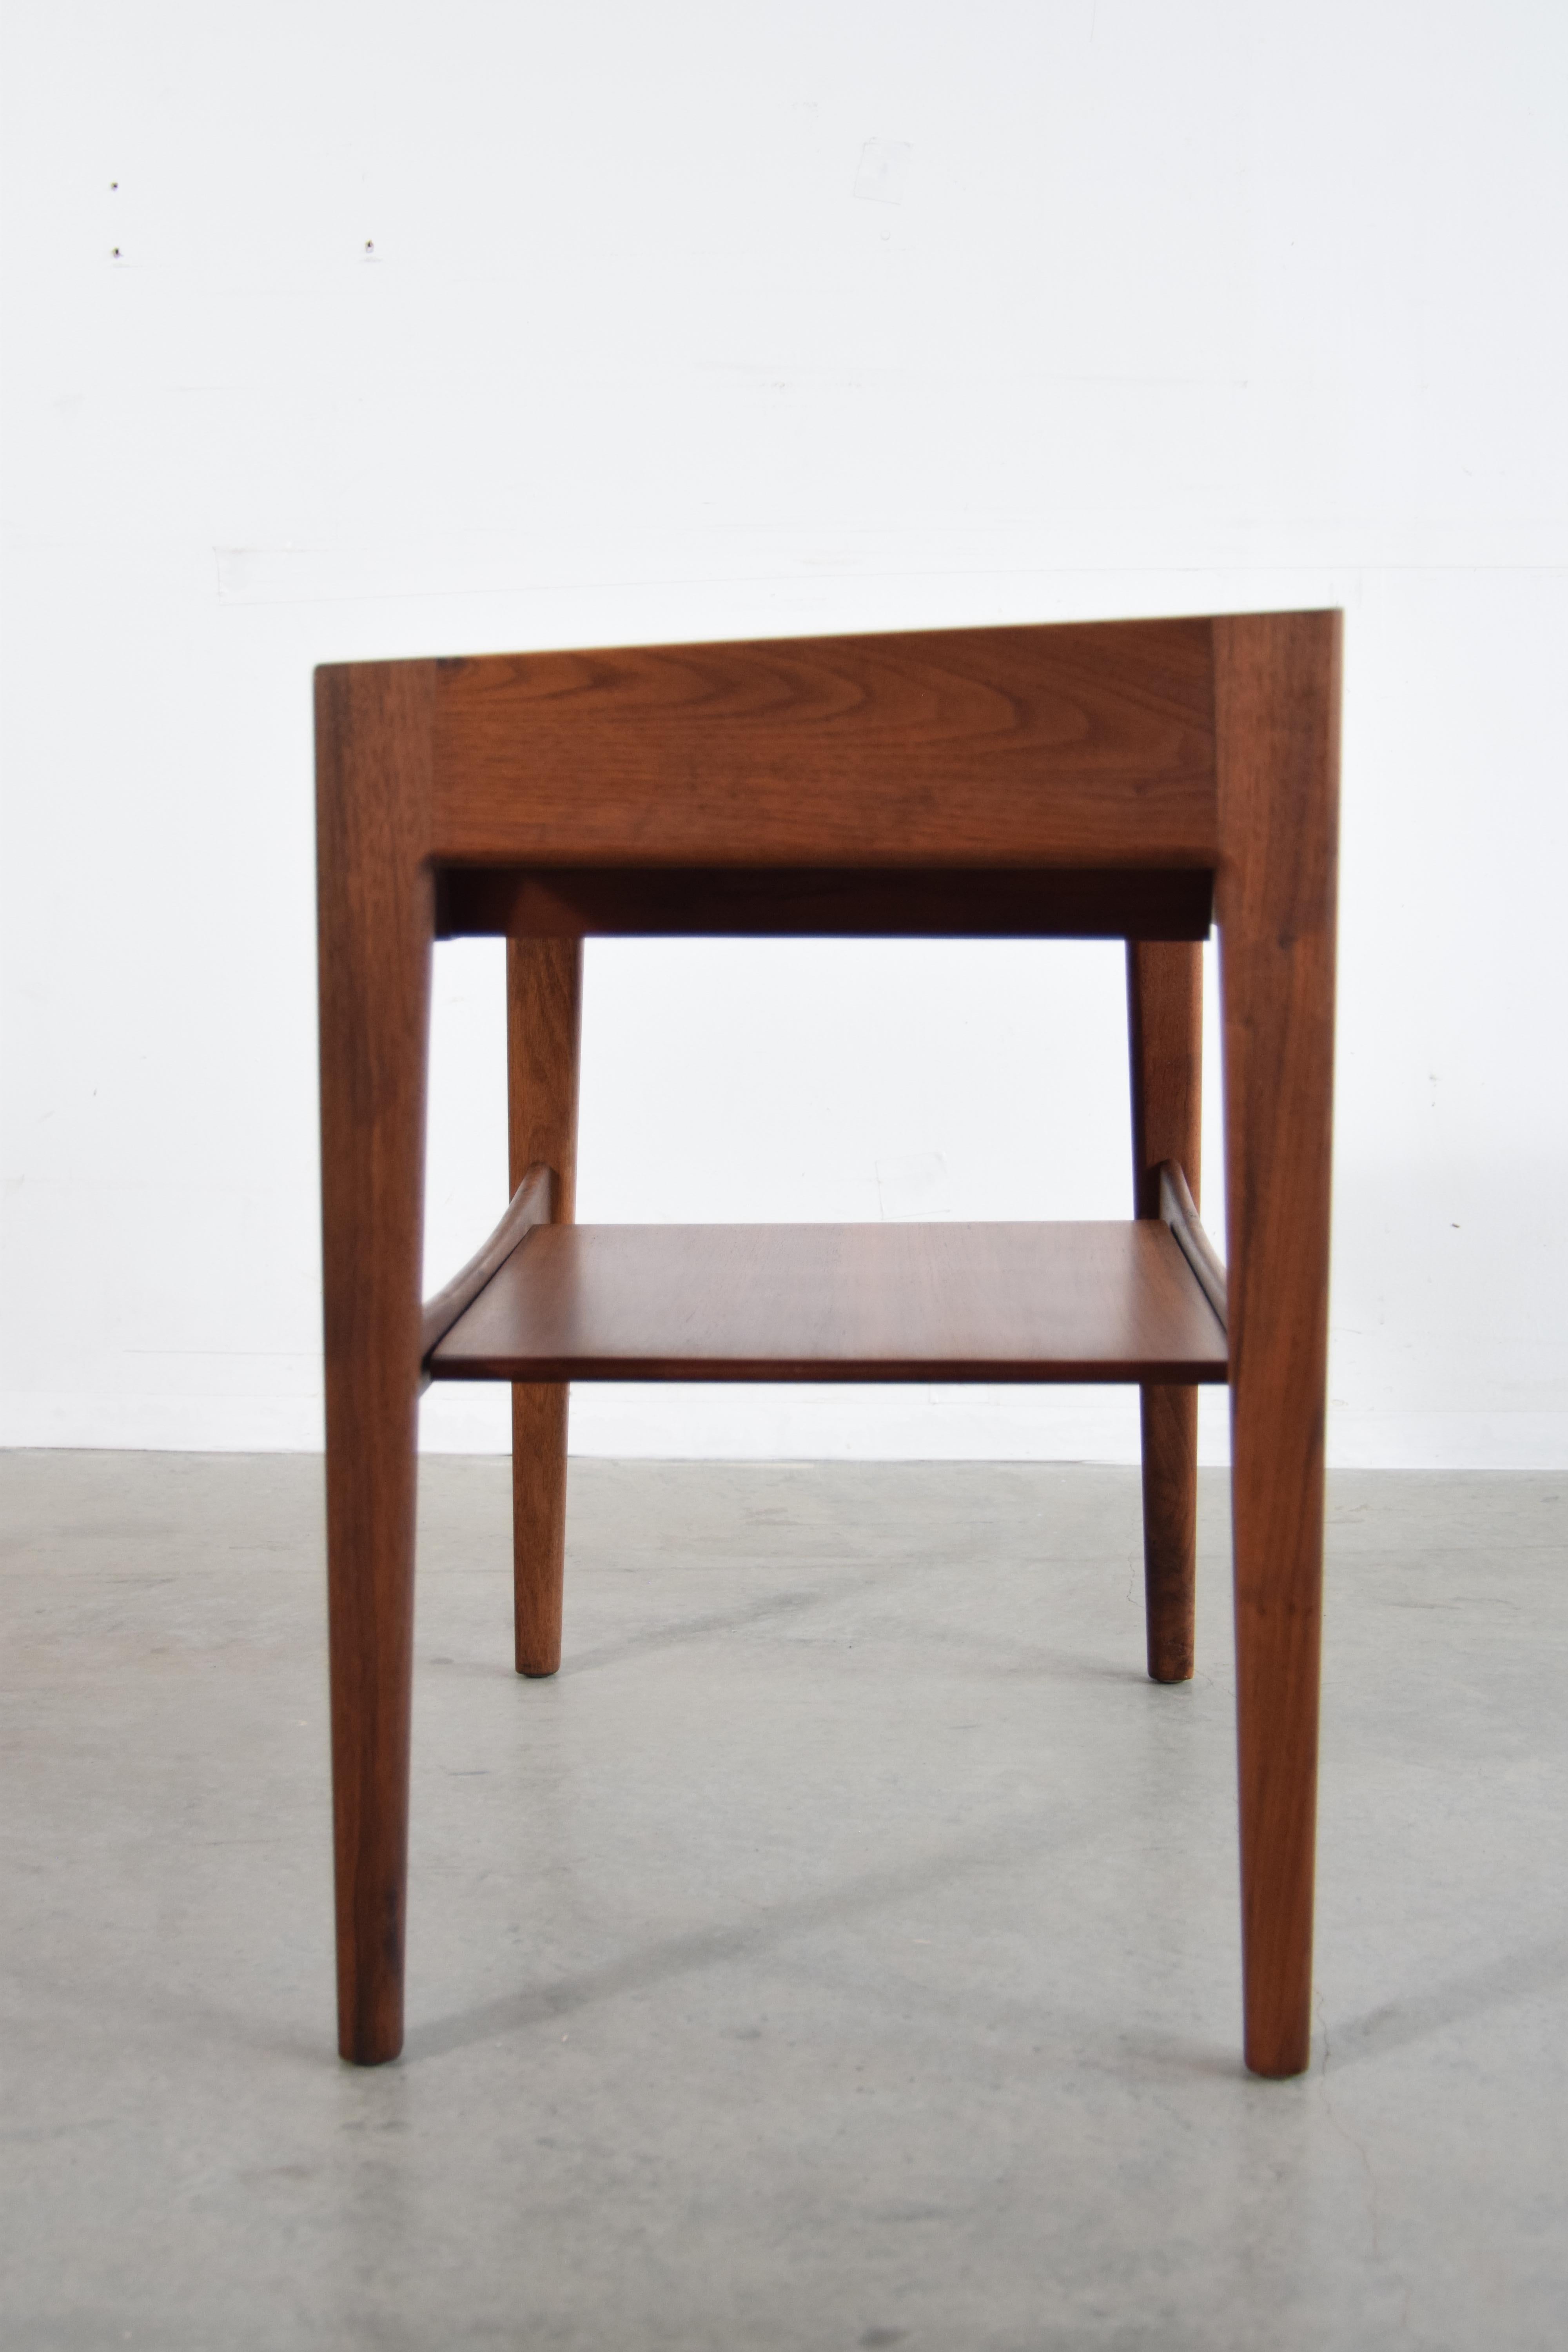 20th Century Walnut Night Stand or End Table by Jens Risom